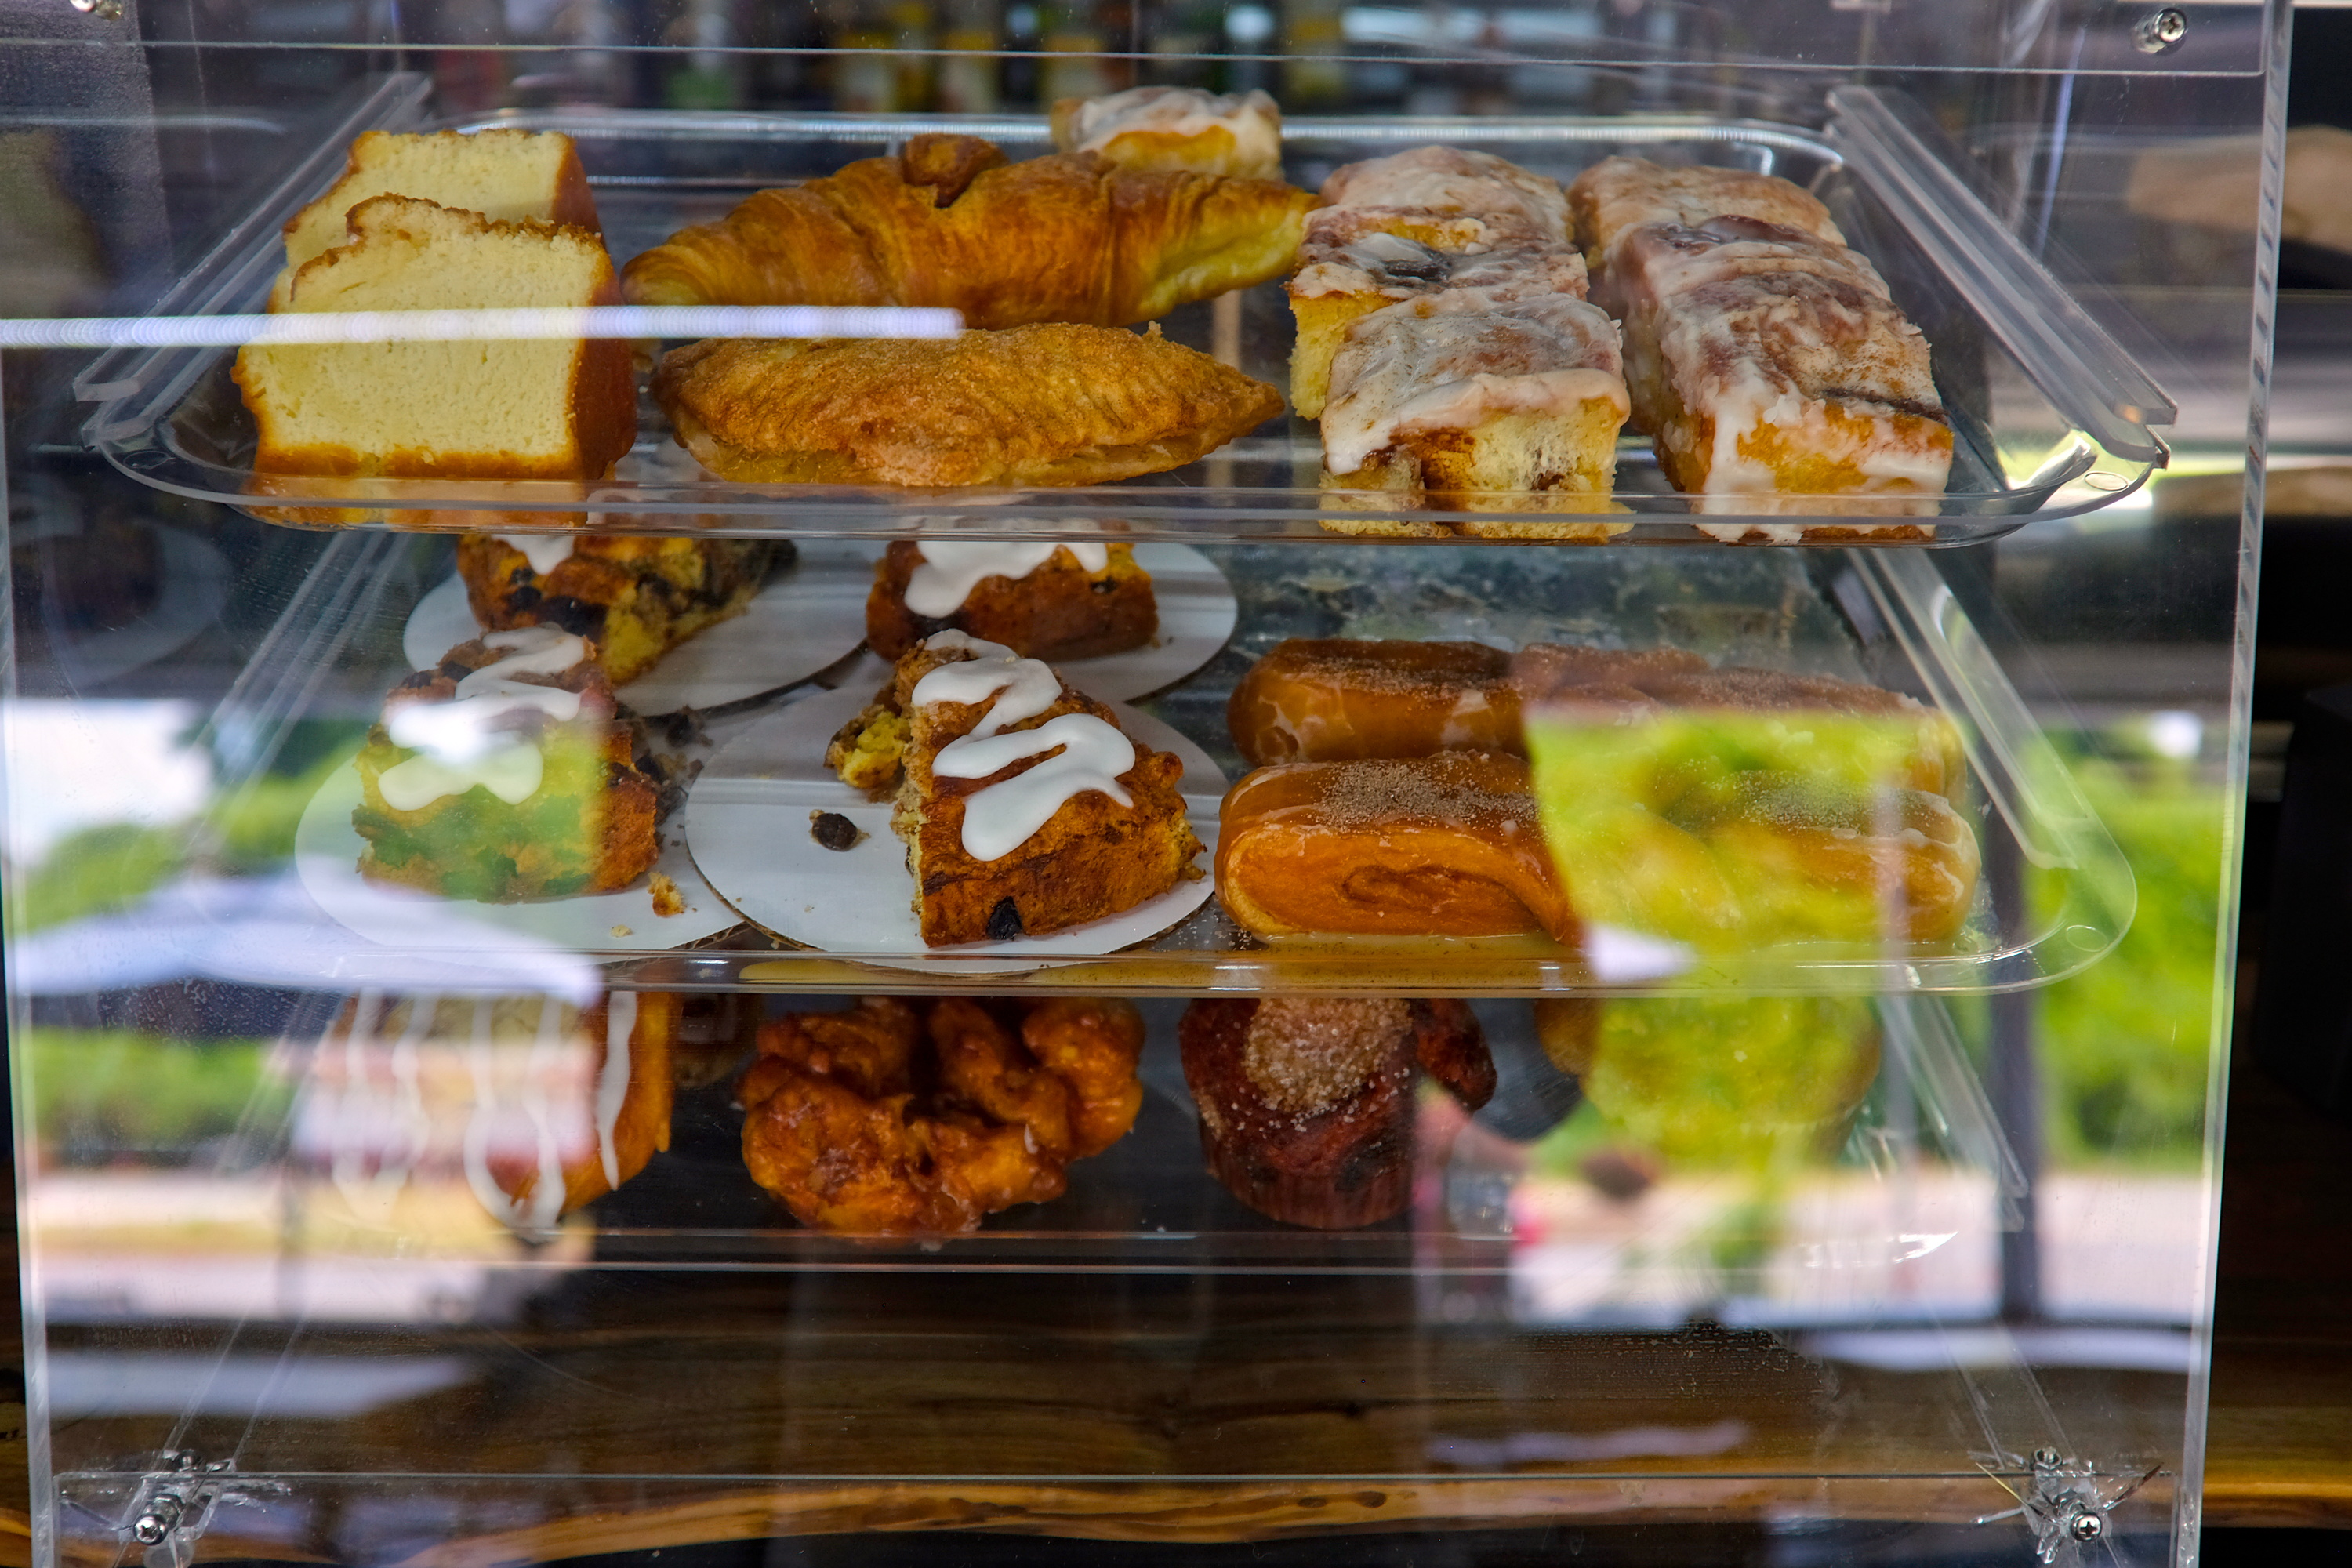 A pastry case at River Roast Coffee